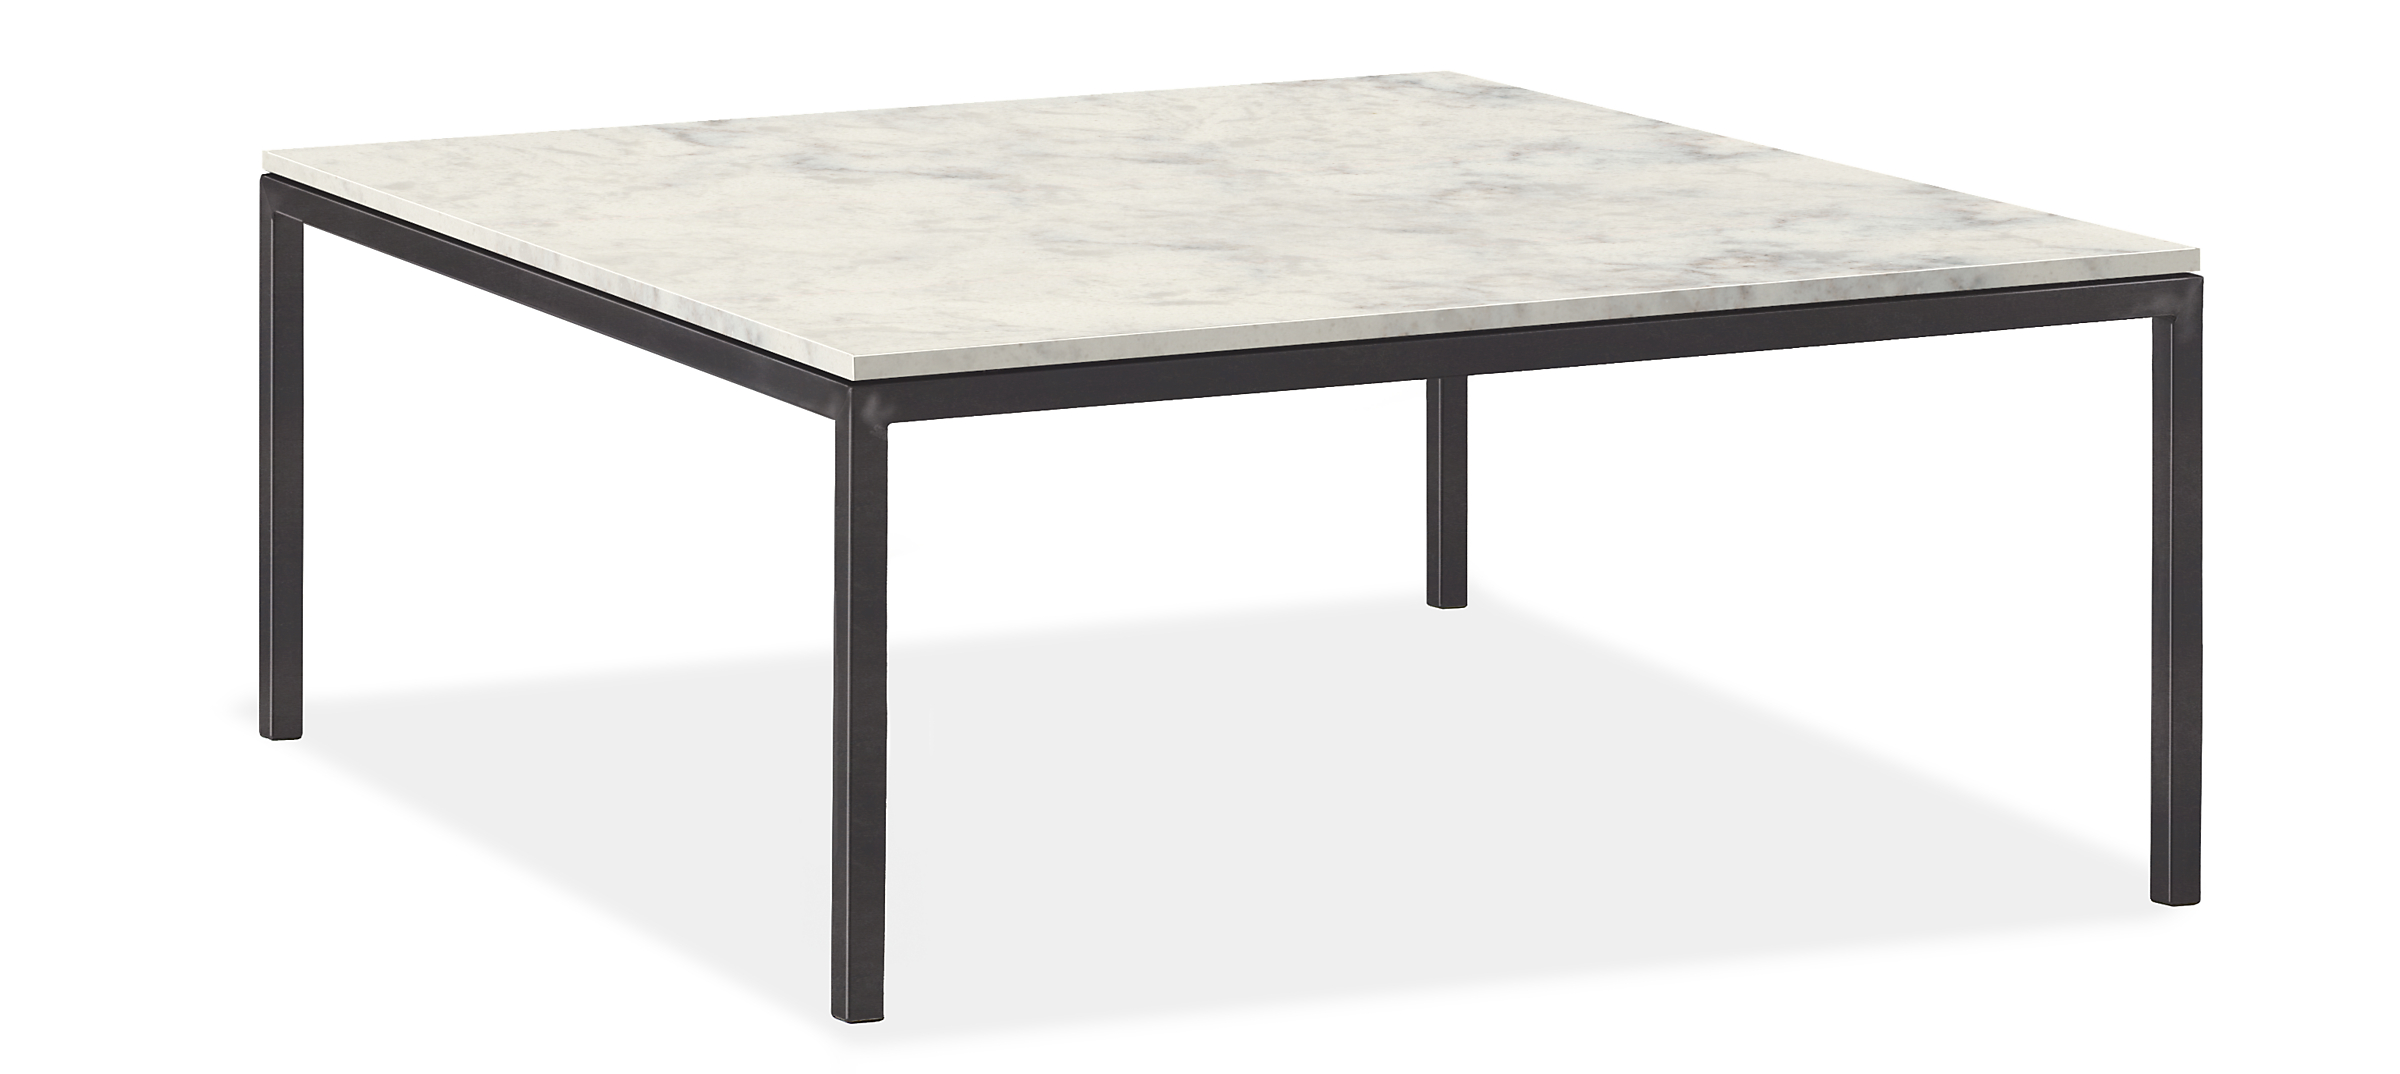 Parsons 36w 36d 16h Coffee Table with 1" Leg